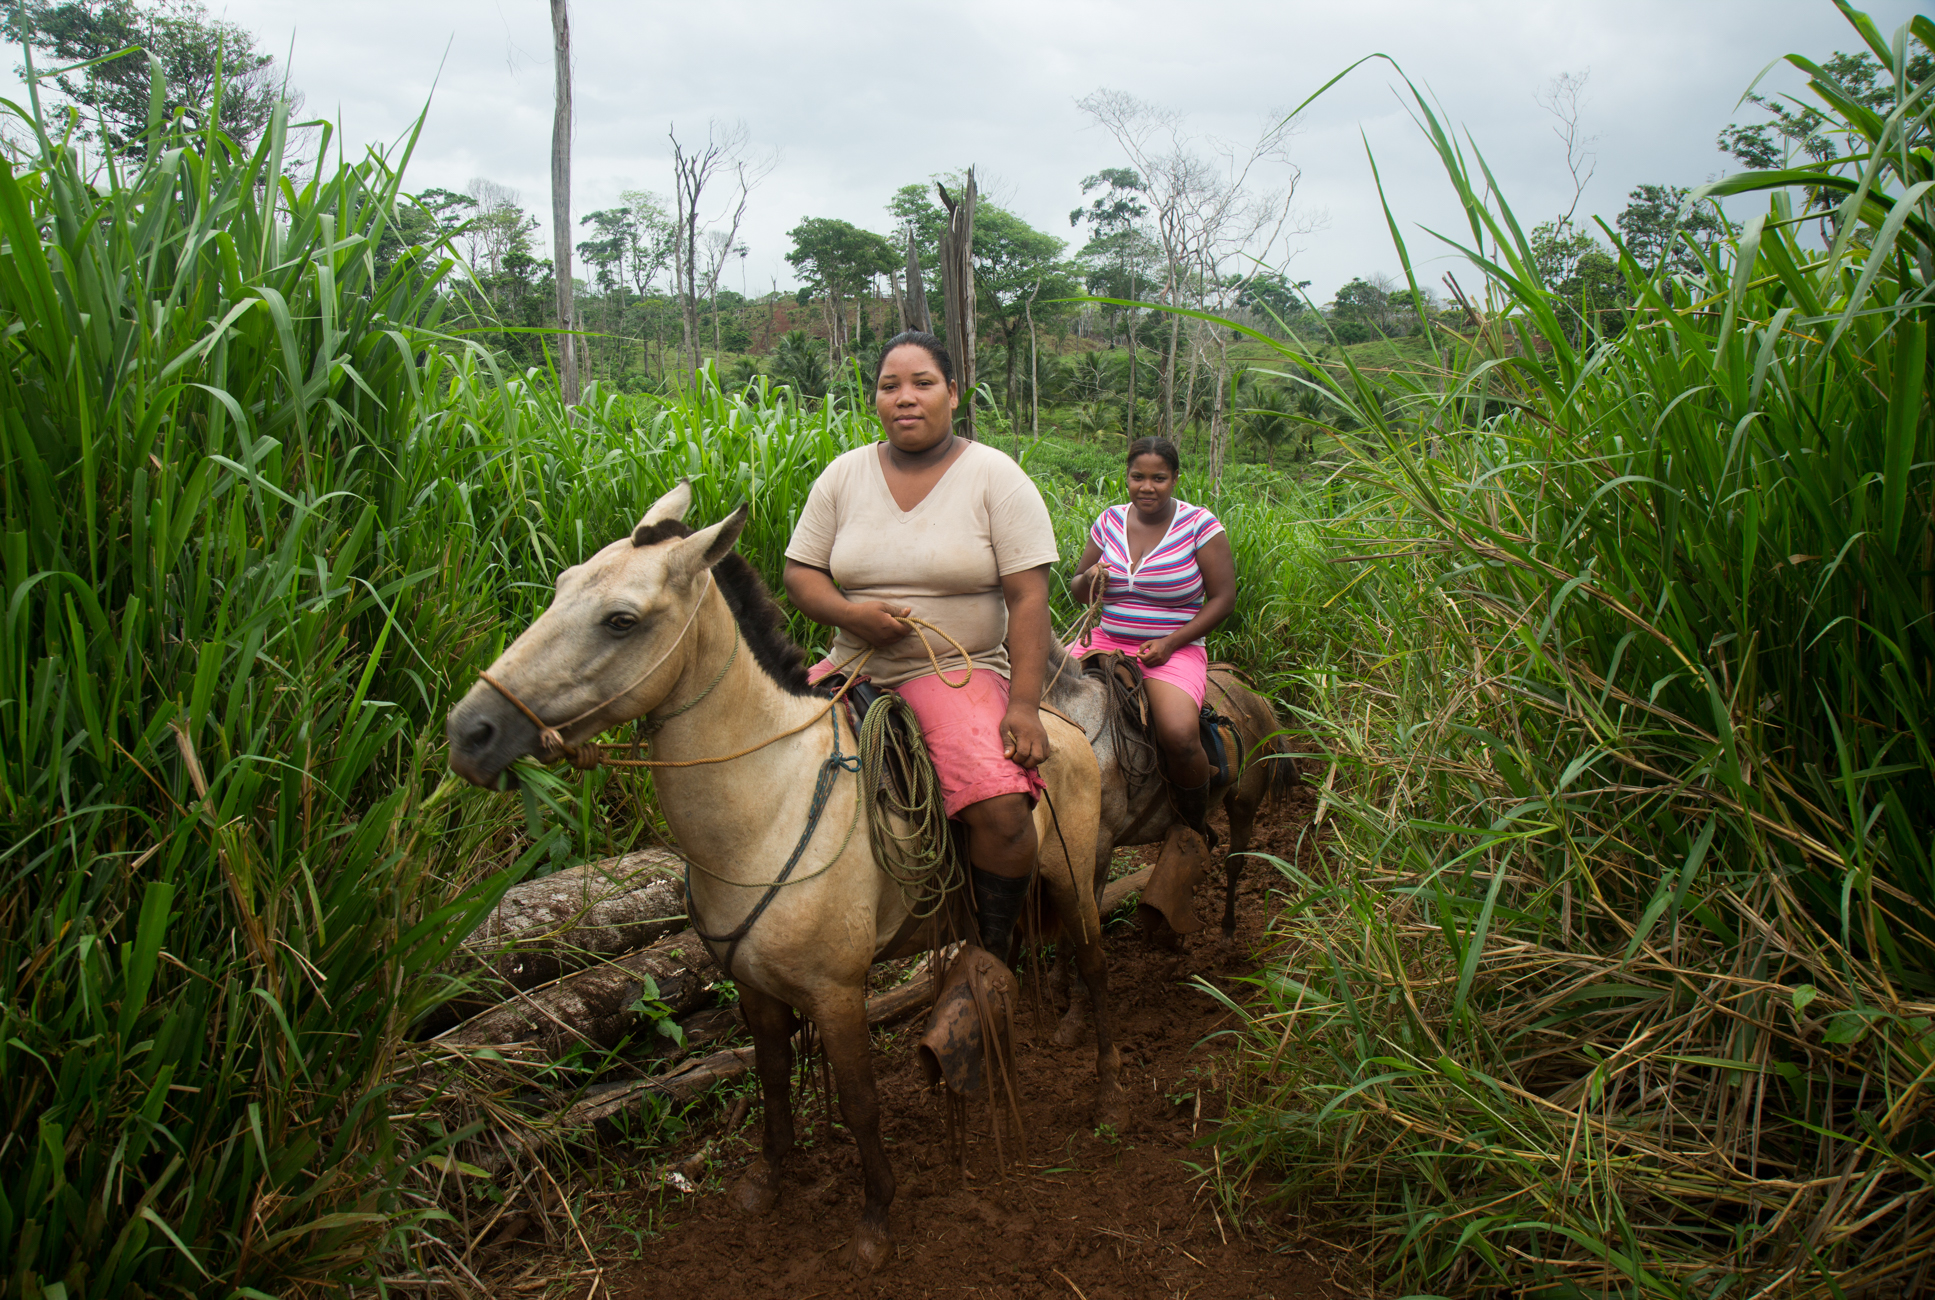  Wendy Quinn, 24, vice-president of Monkey point, and Ligia Bridgette McElroy return to their village on horseback after planting rice with other community members on her farm near their community, an afro-kriol community on Nicaragua's southeastern 